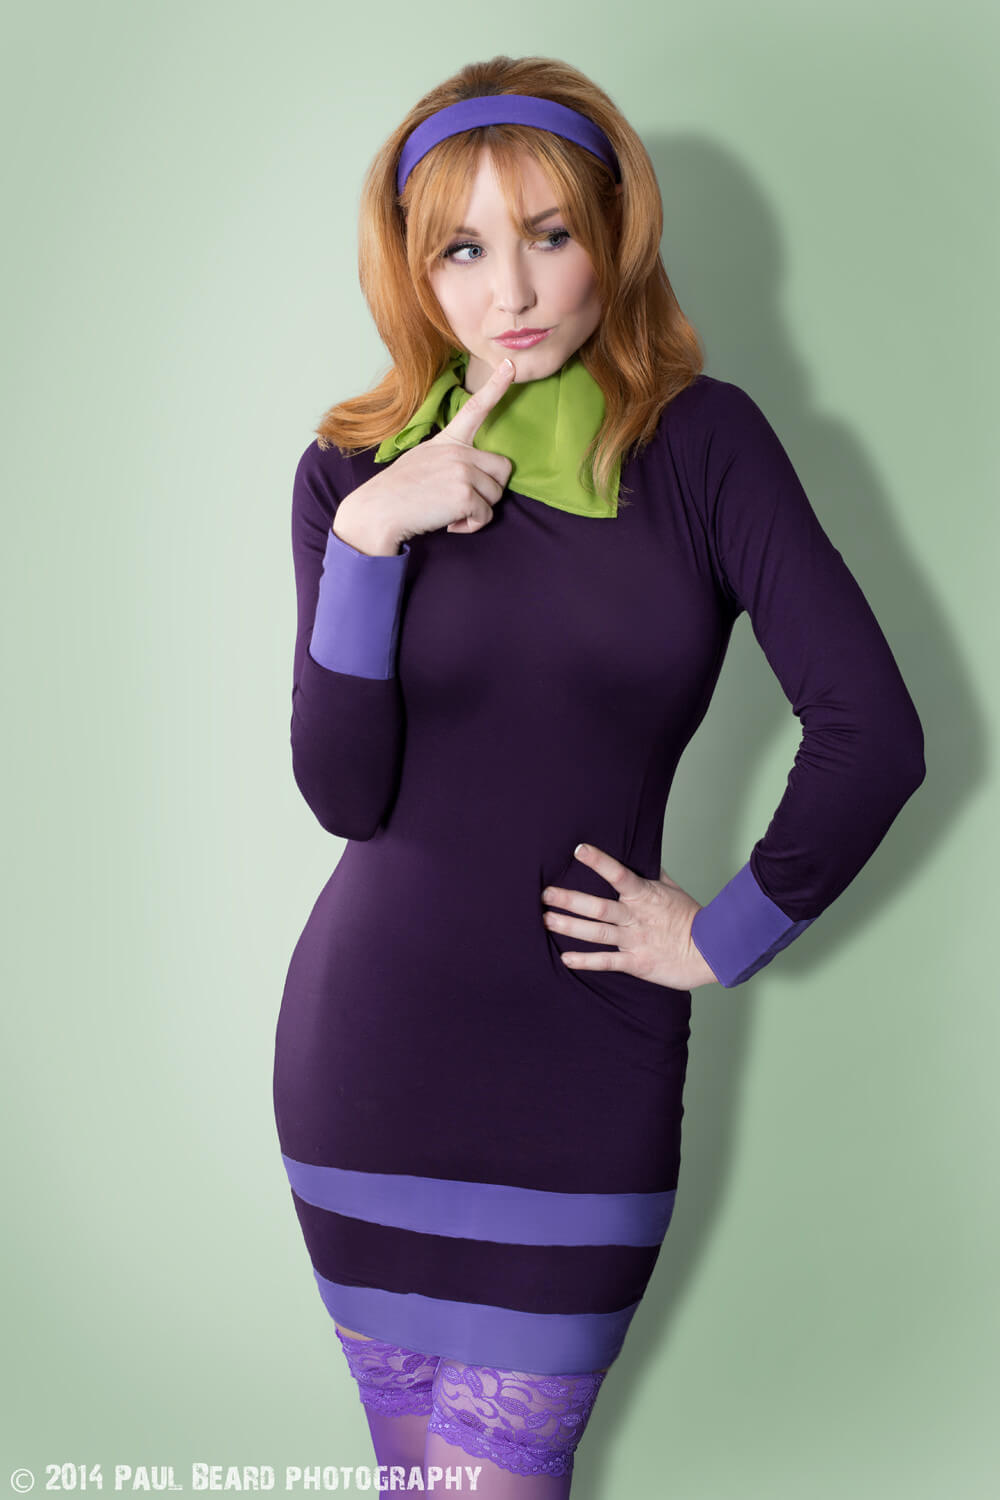 70+ Hot Pictures Of Daphne Blake From Scooby Doo Which Are Sure to Catch Your Attention 4